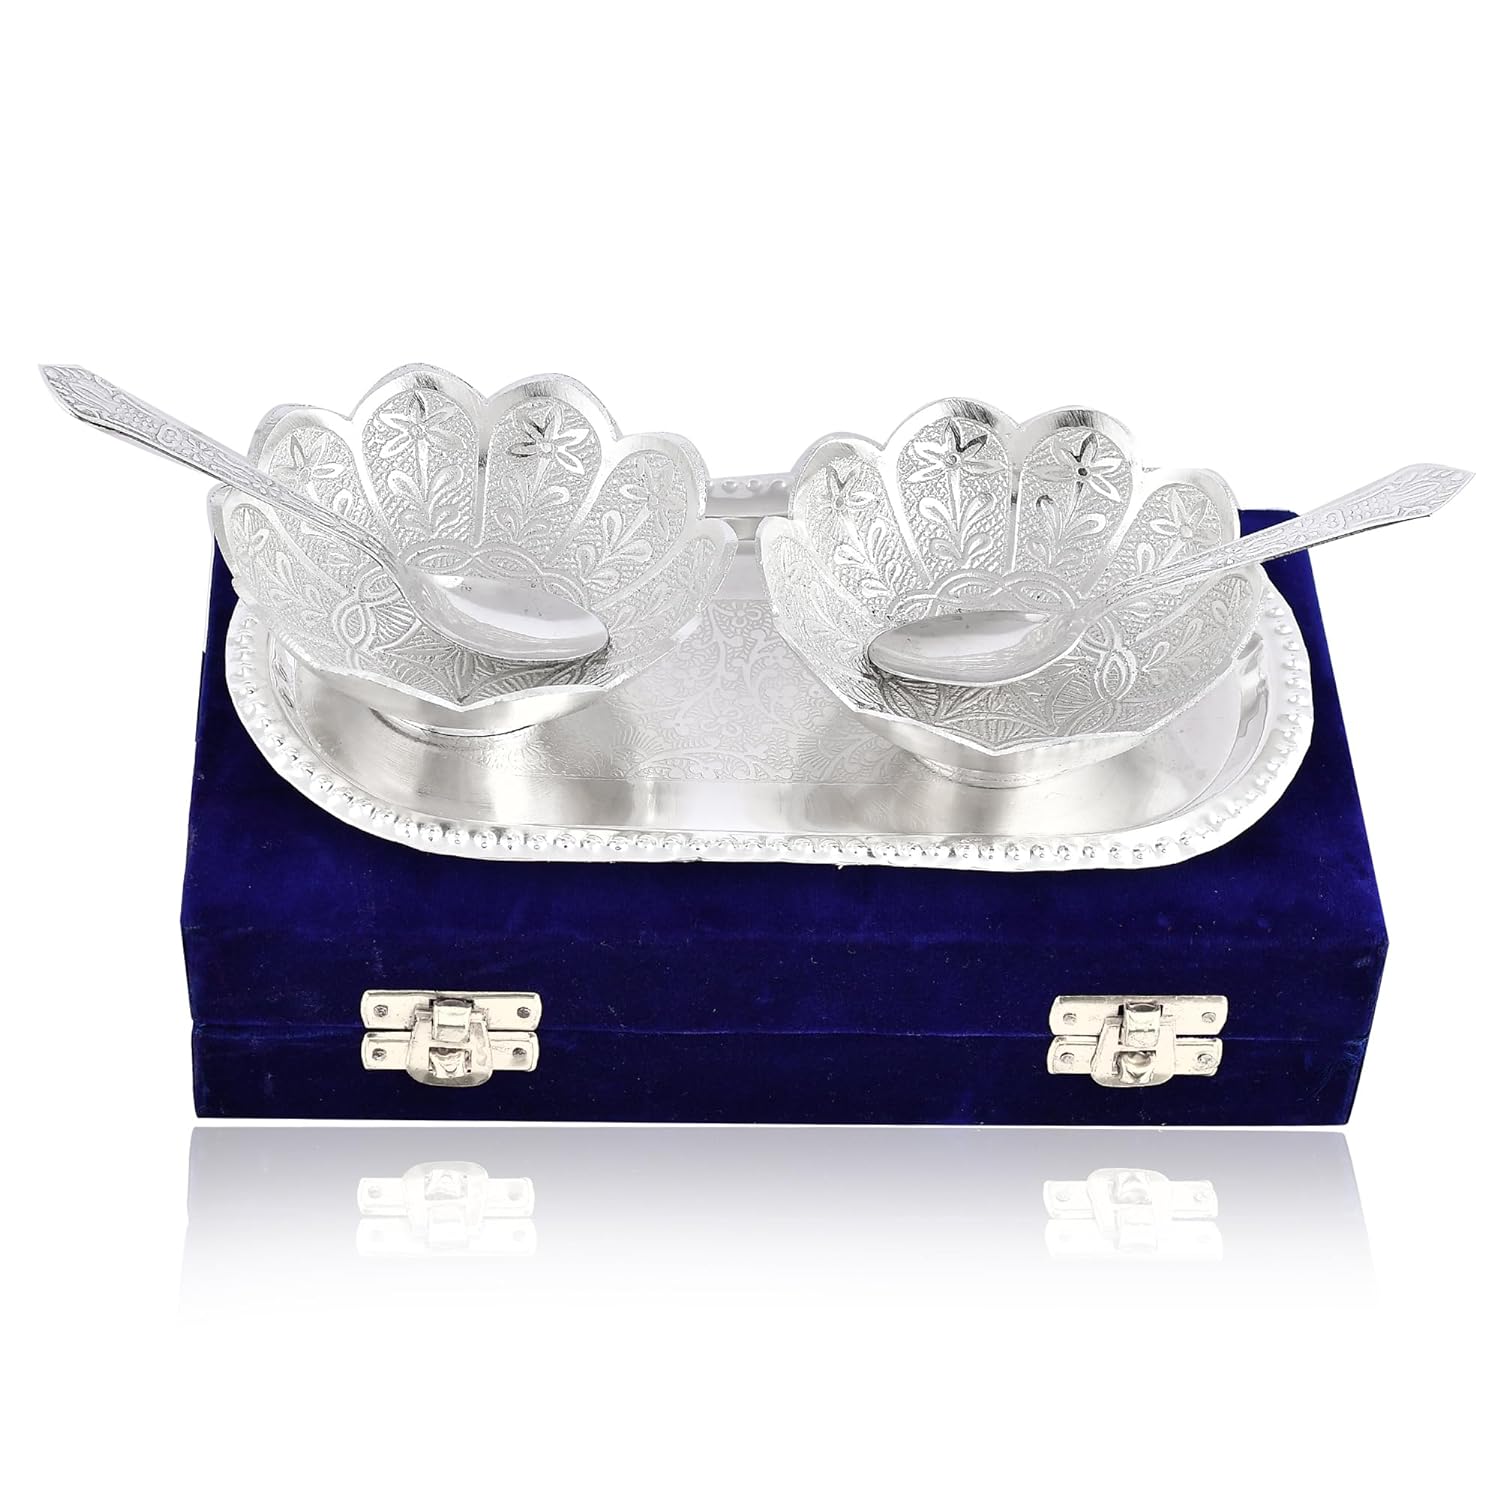 BENGALEN Silver Plated Bowl Spoon Tray Set Dessert Dry Fruits Serving Diwali Christmas Eid Wedding Return Gifts Friends Family Home Decoration Housewarming Corporate Gift Items